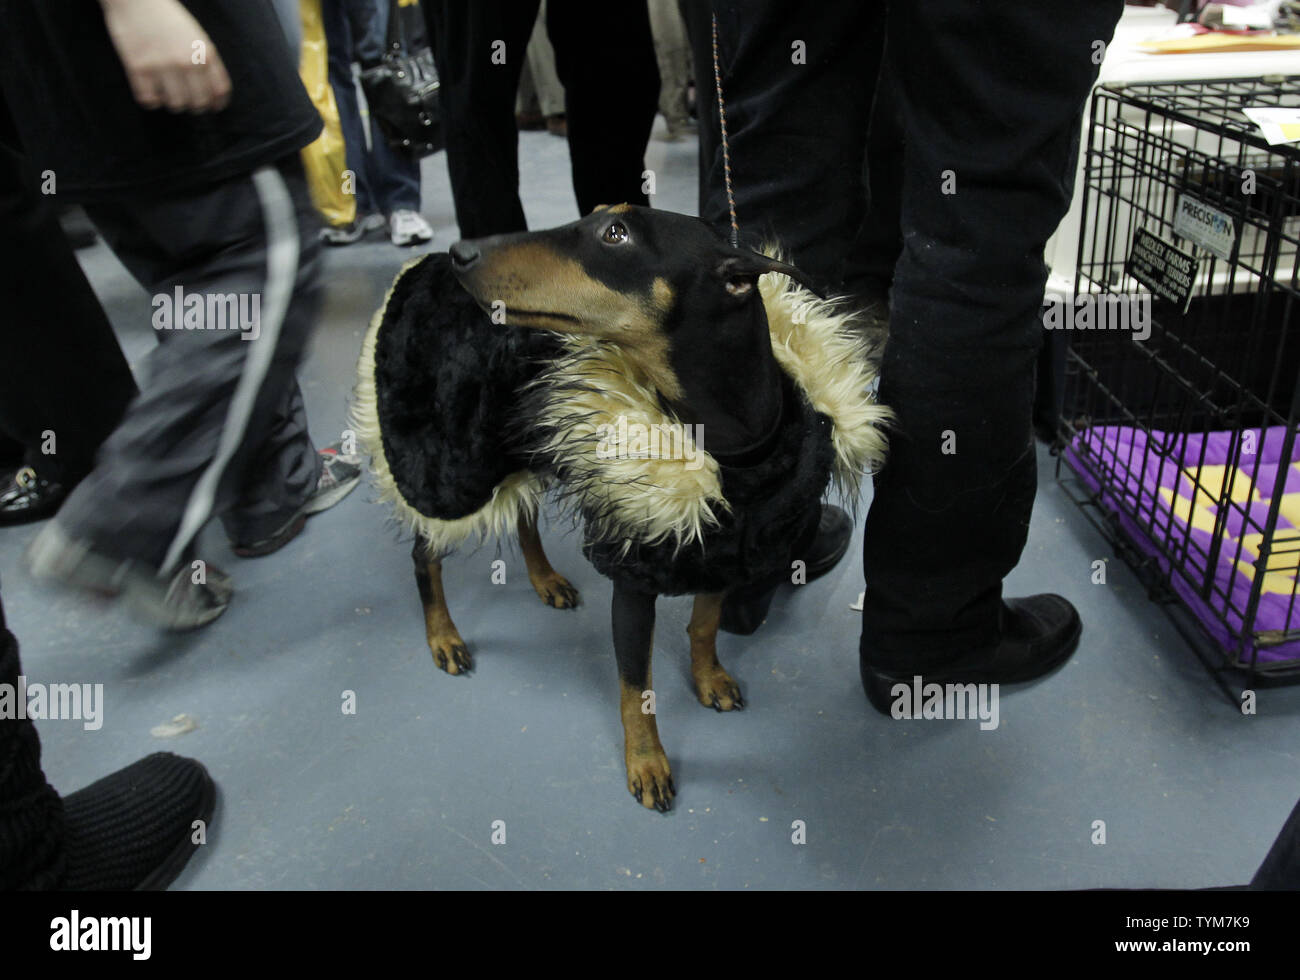 A standard size Manchester Terrier waits backstage wearing a coat at the  135th Annual Westminster Kennel Club Dog Show at Madison Square Garden in  New York City on February 15, 2011. UPI/John